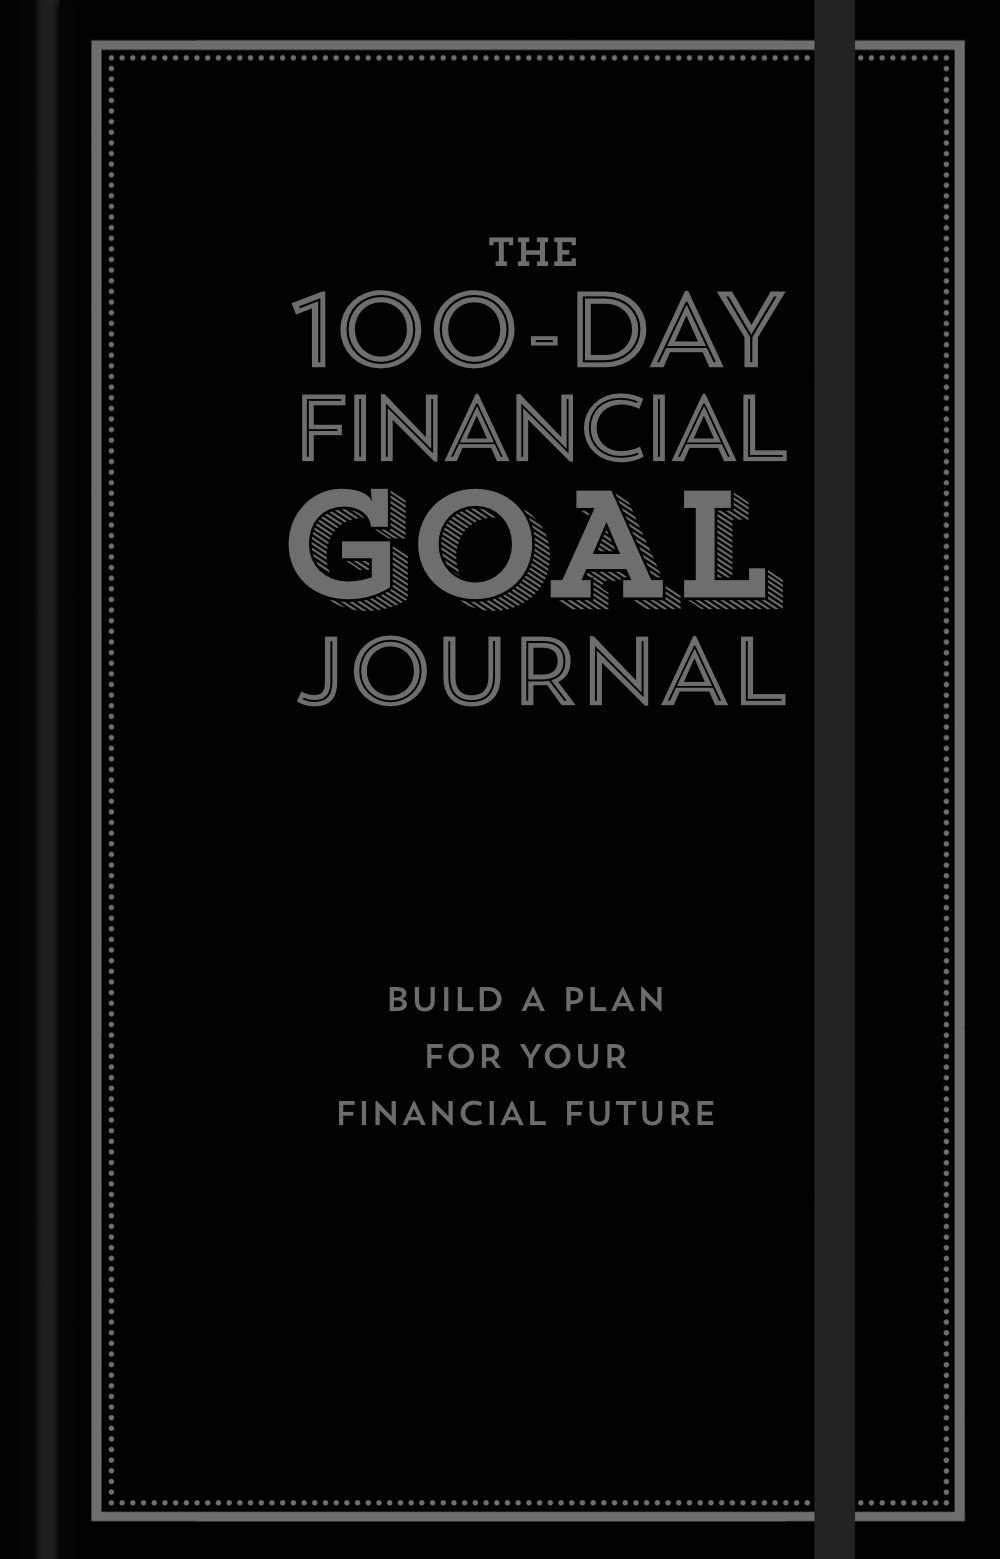 The 100-Day Financial Goal Journal:  Build a Plan for Your Financial Future Hardcover